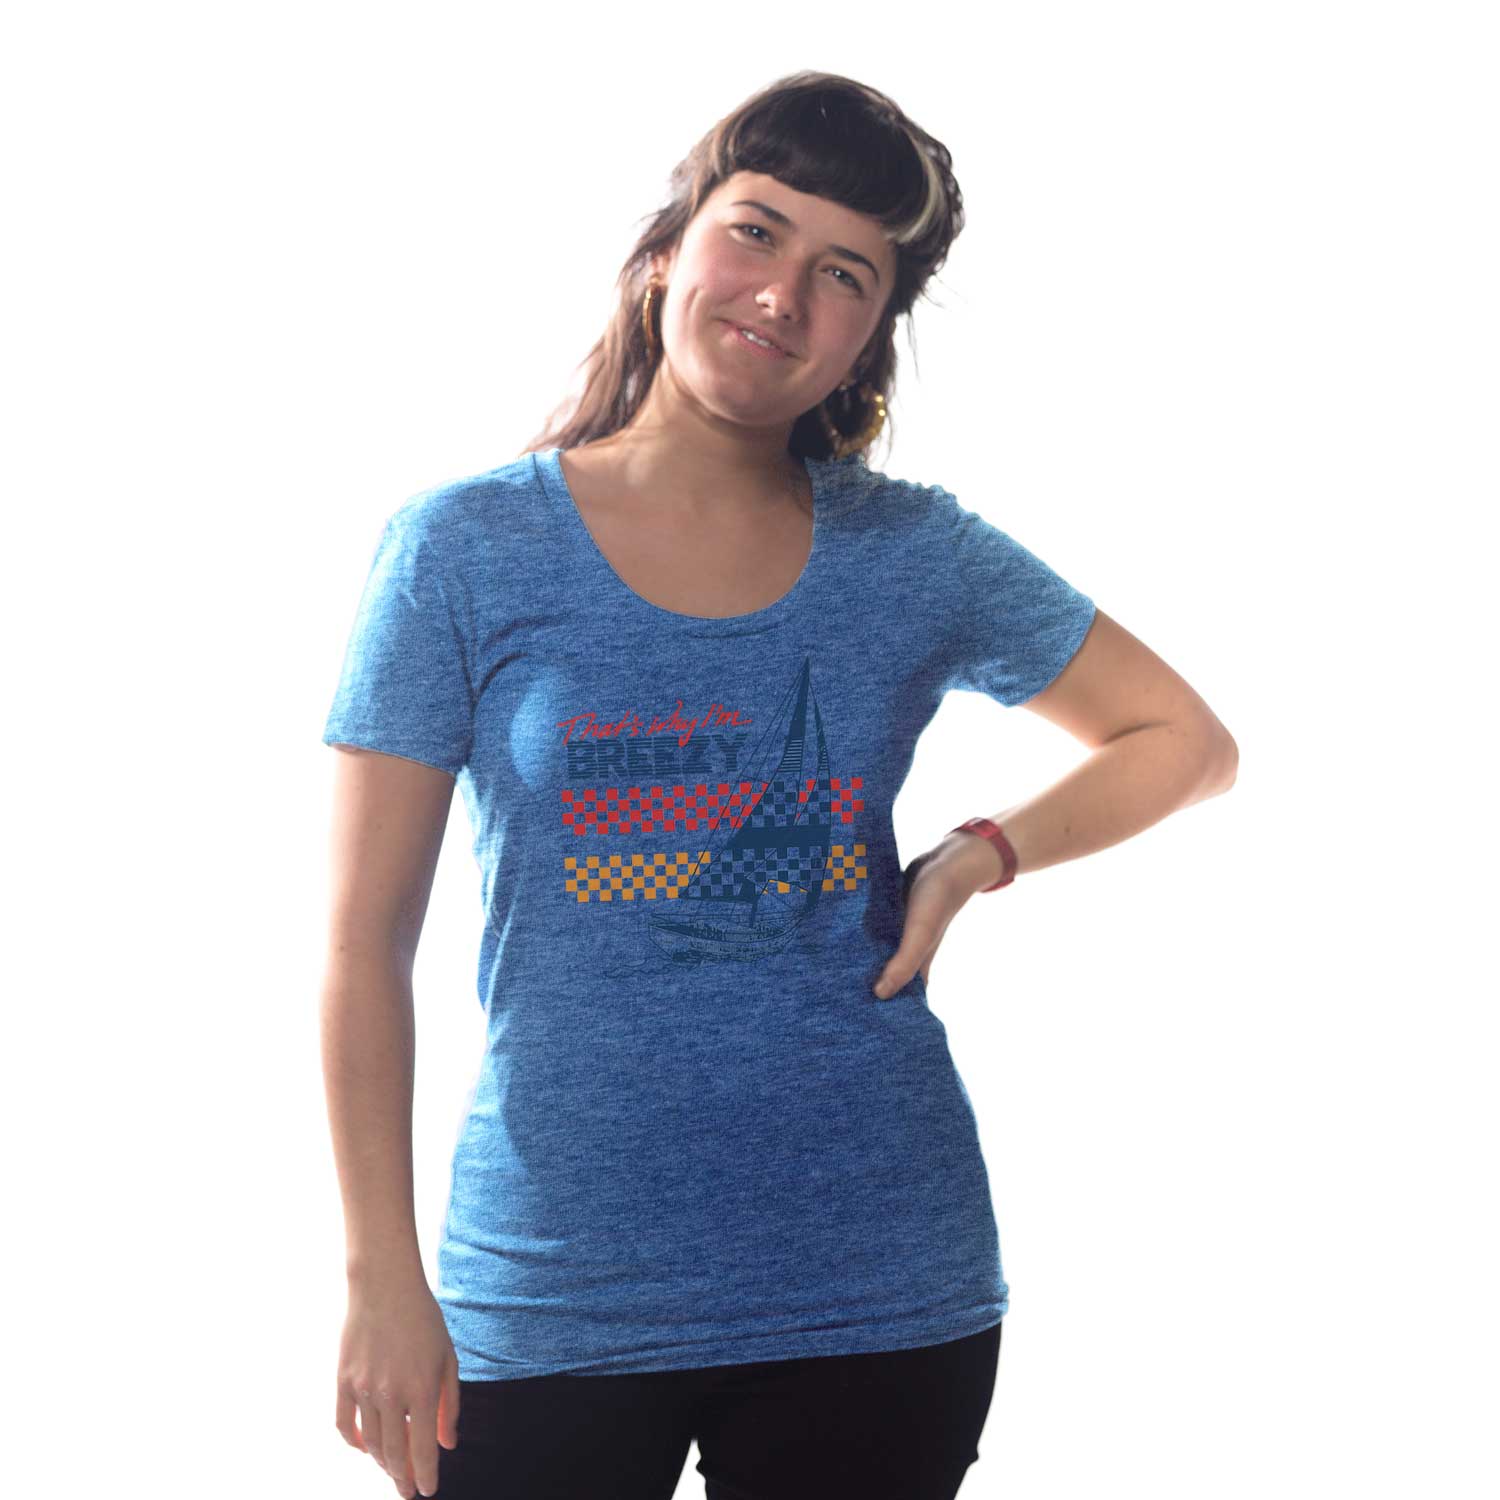 Women's That's Why I'm Breezy Retro Graphic Tee | Vintage Sailboat Captain on Model | Solid Threads